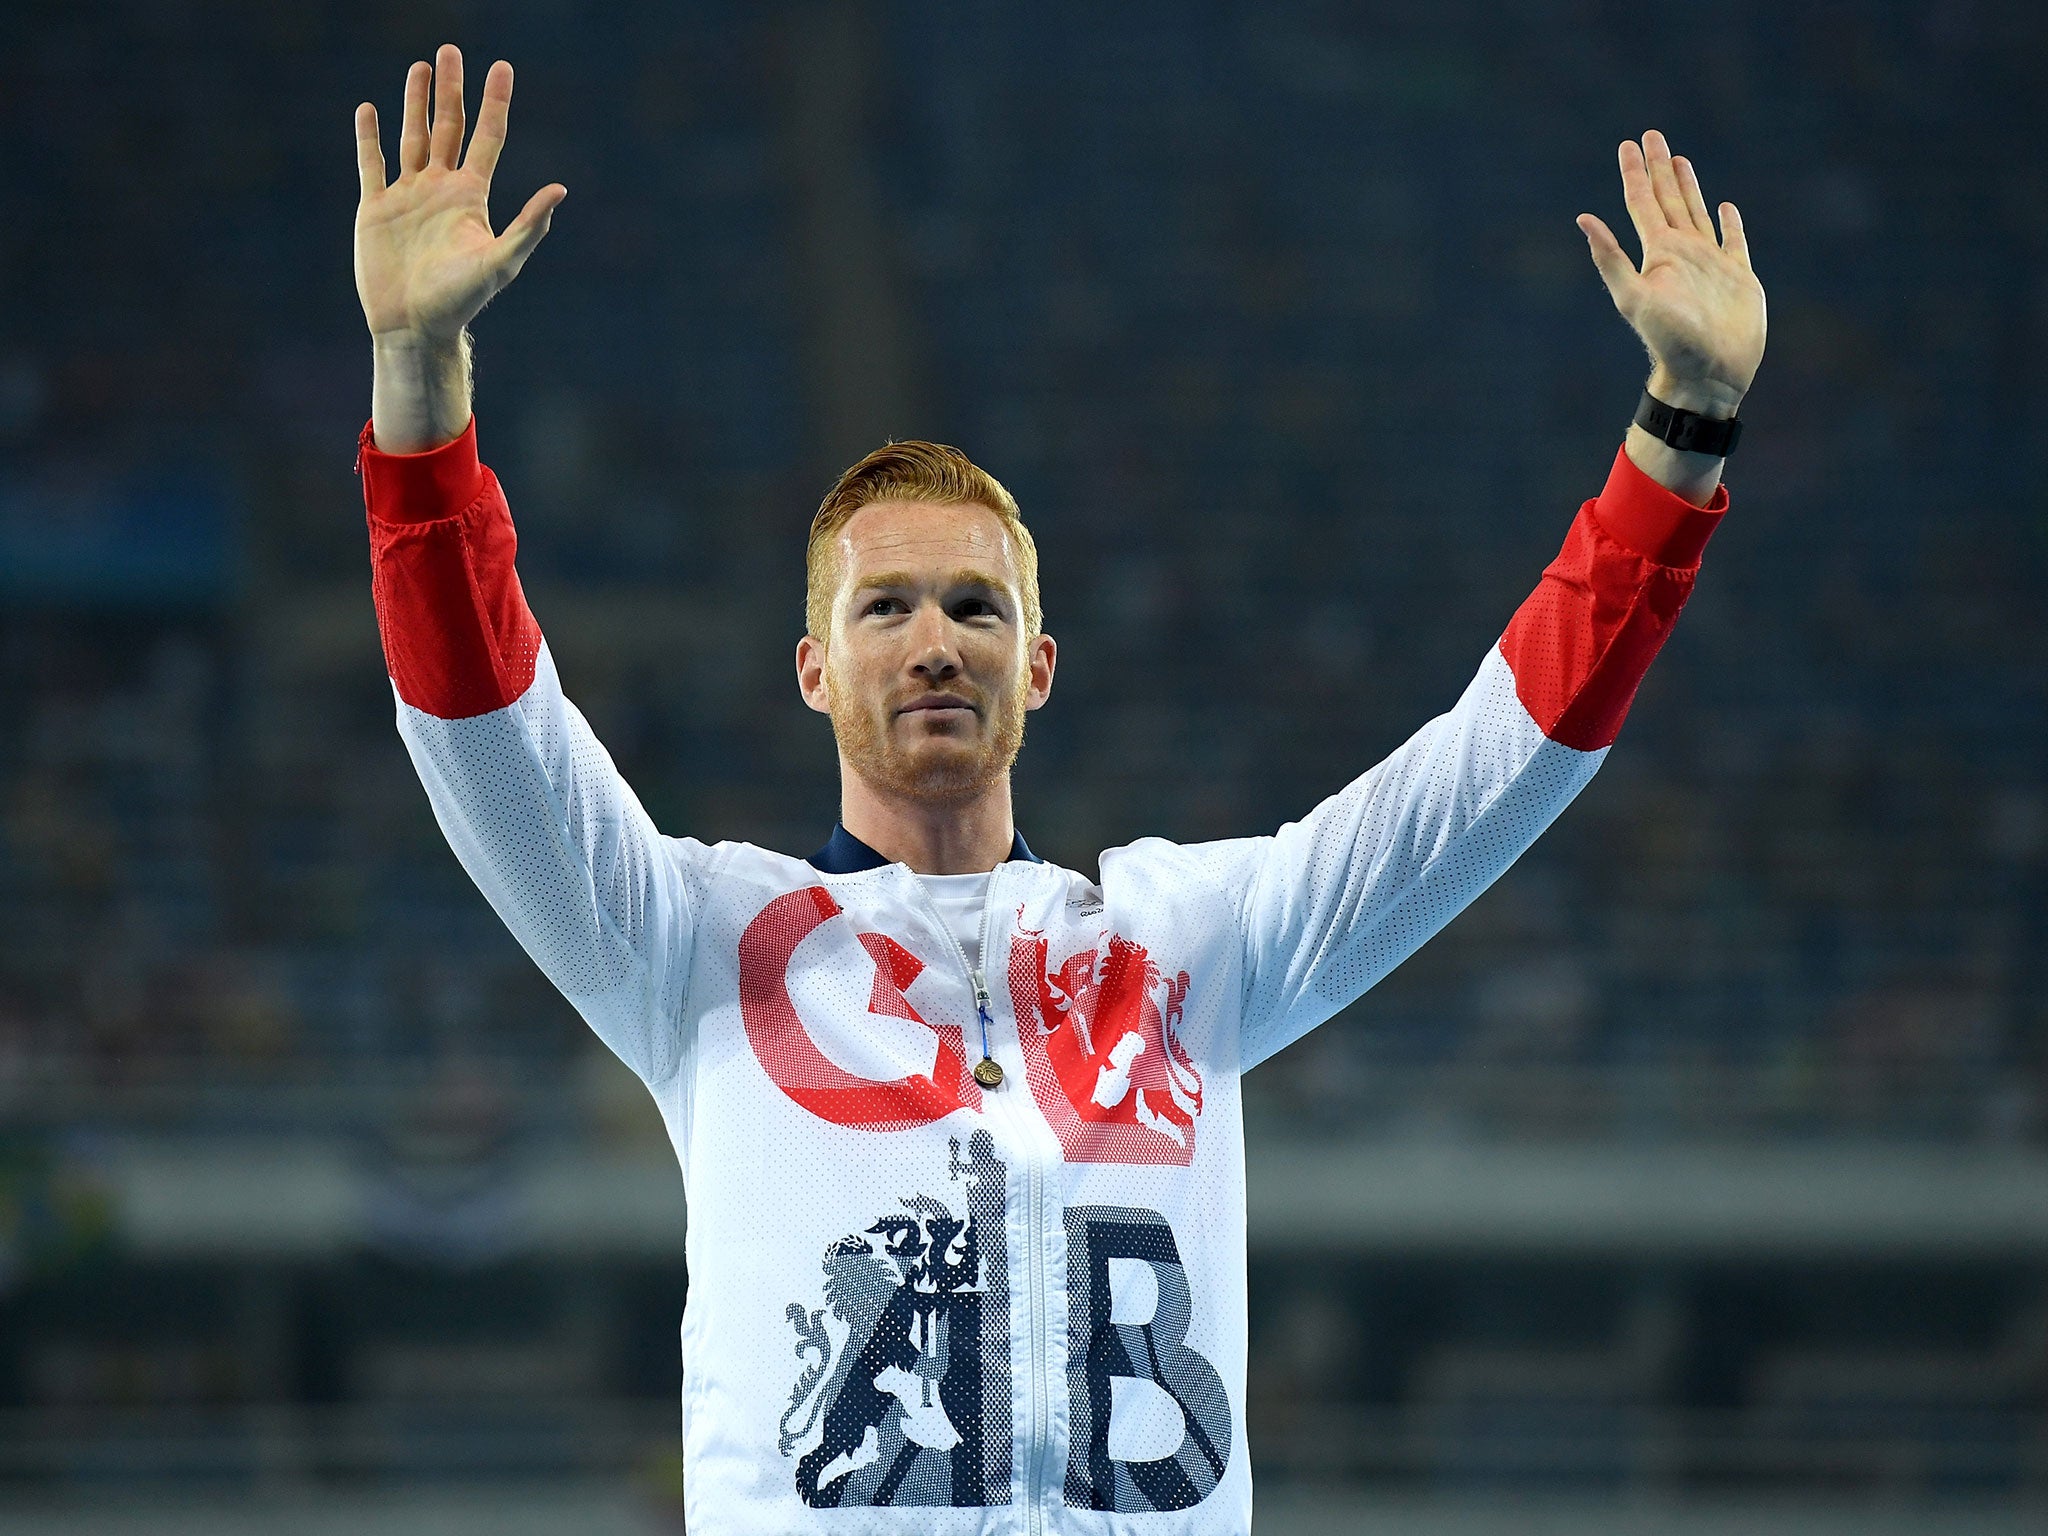 Greg Rutherford will defend his Commonwealth gold medal